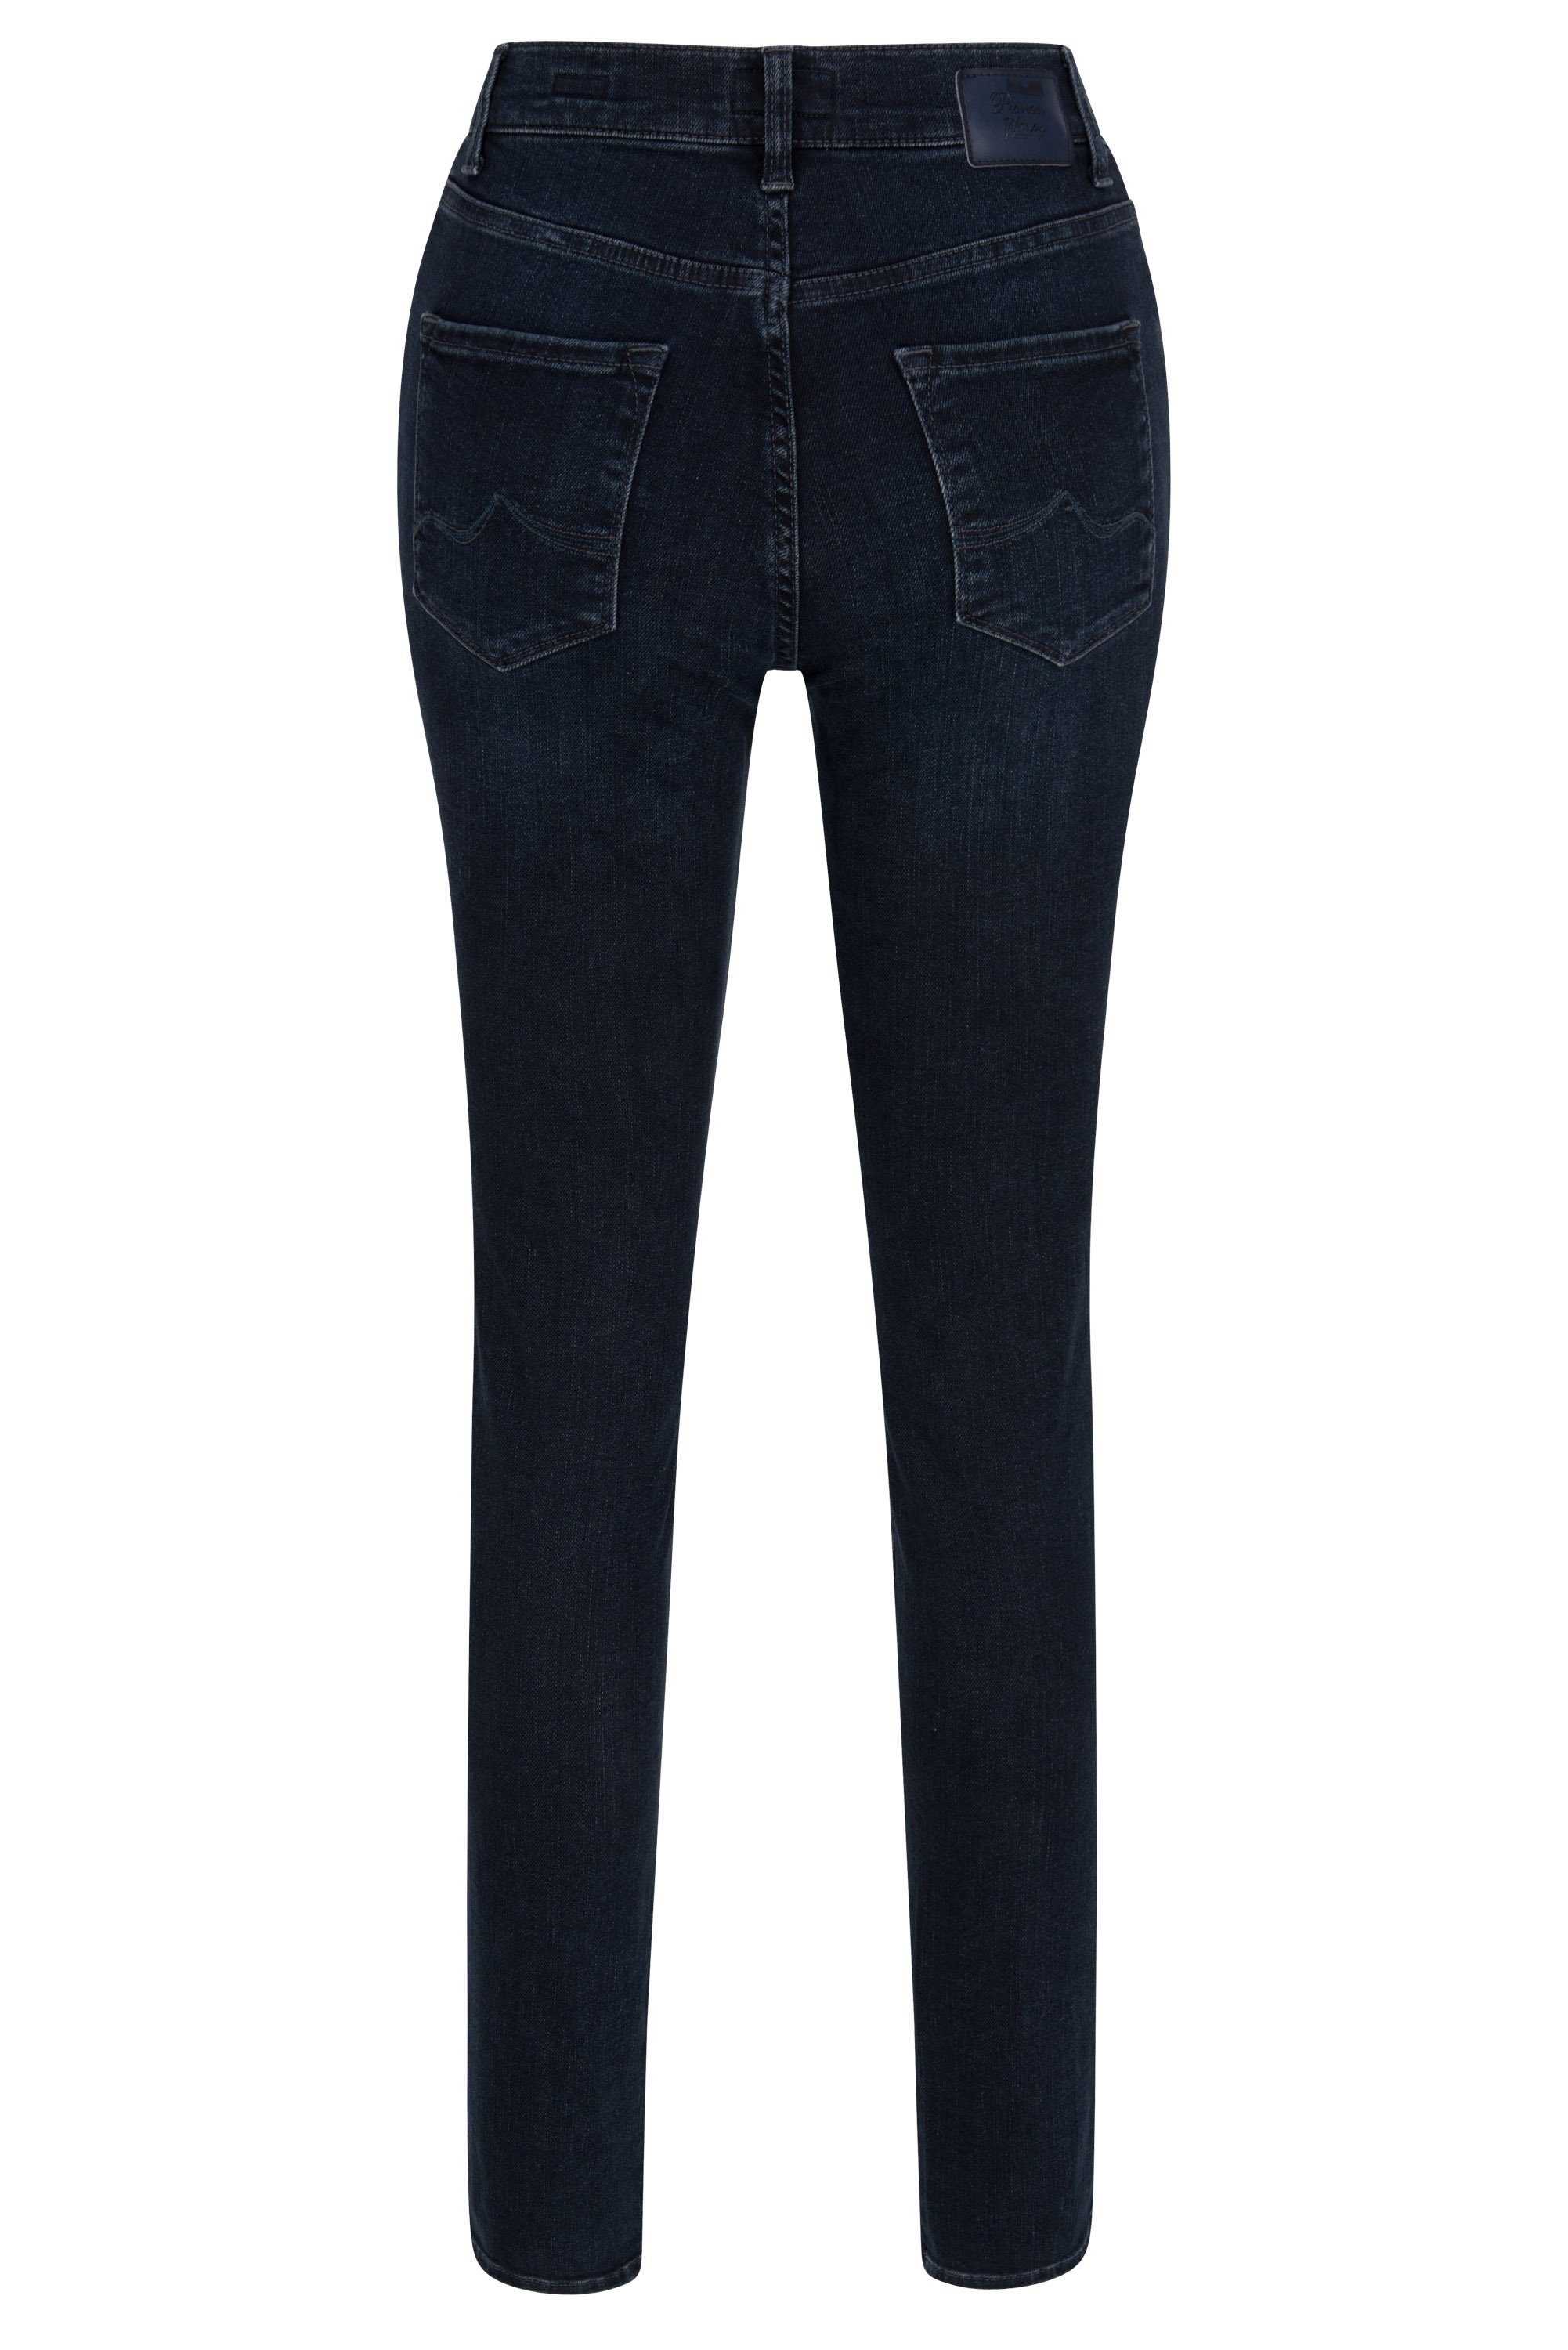 Stretch-Jeans - PIONEER blue Pioneer KATY Authentic out 5011.62 washed POWERSTRETCH Jeans 3011 dark